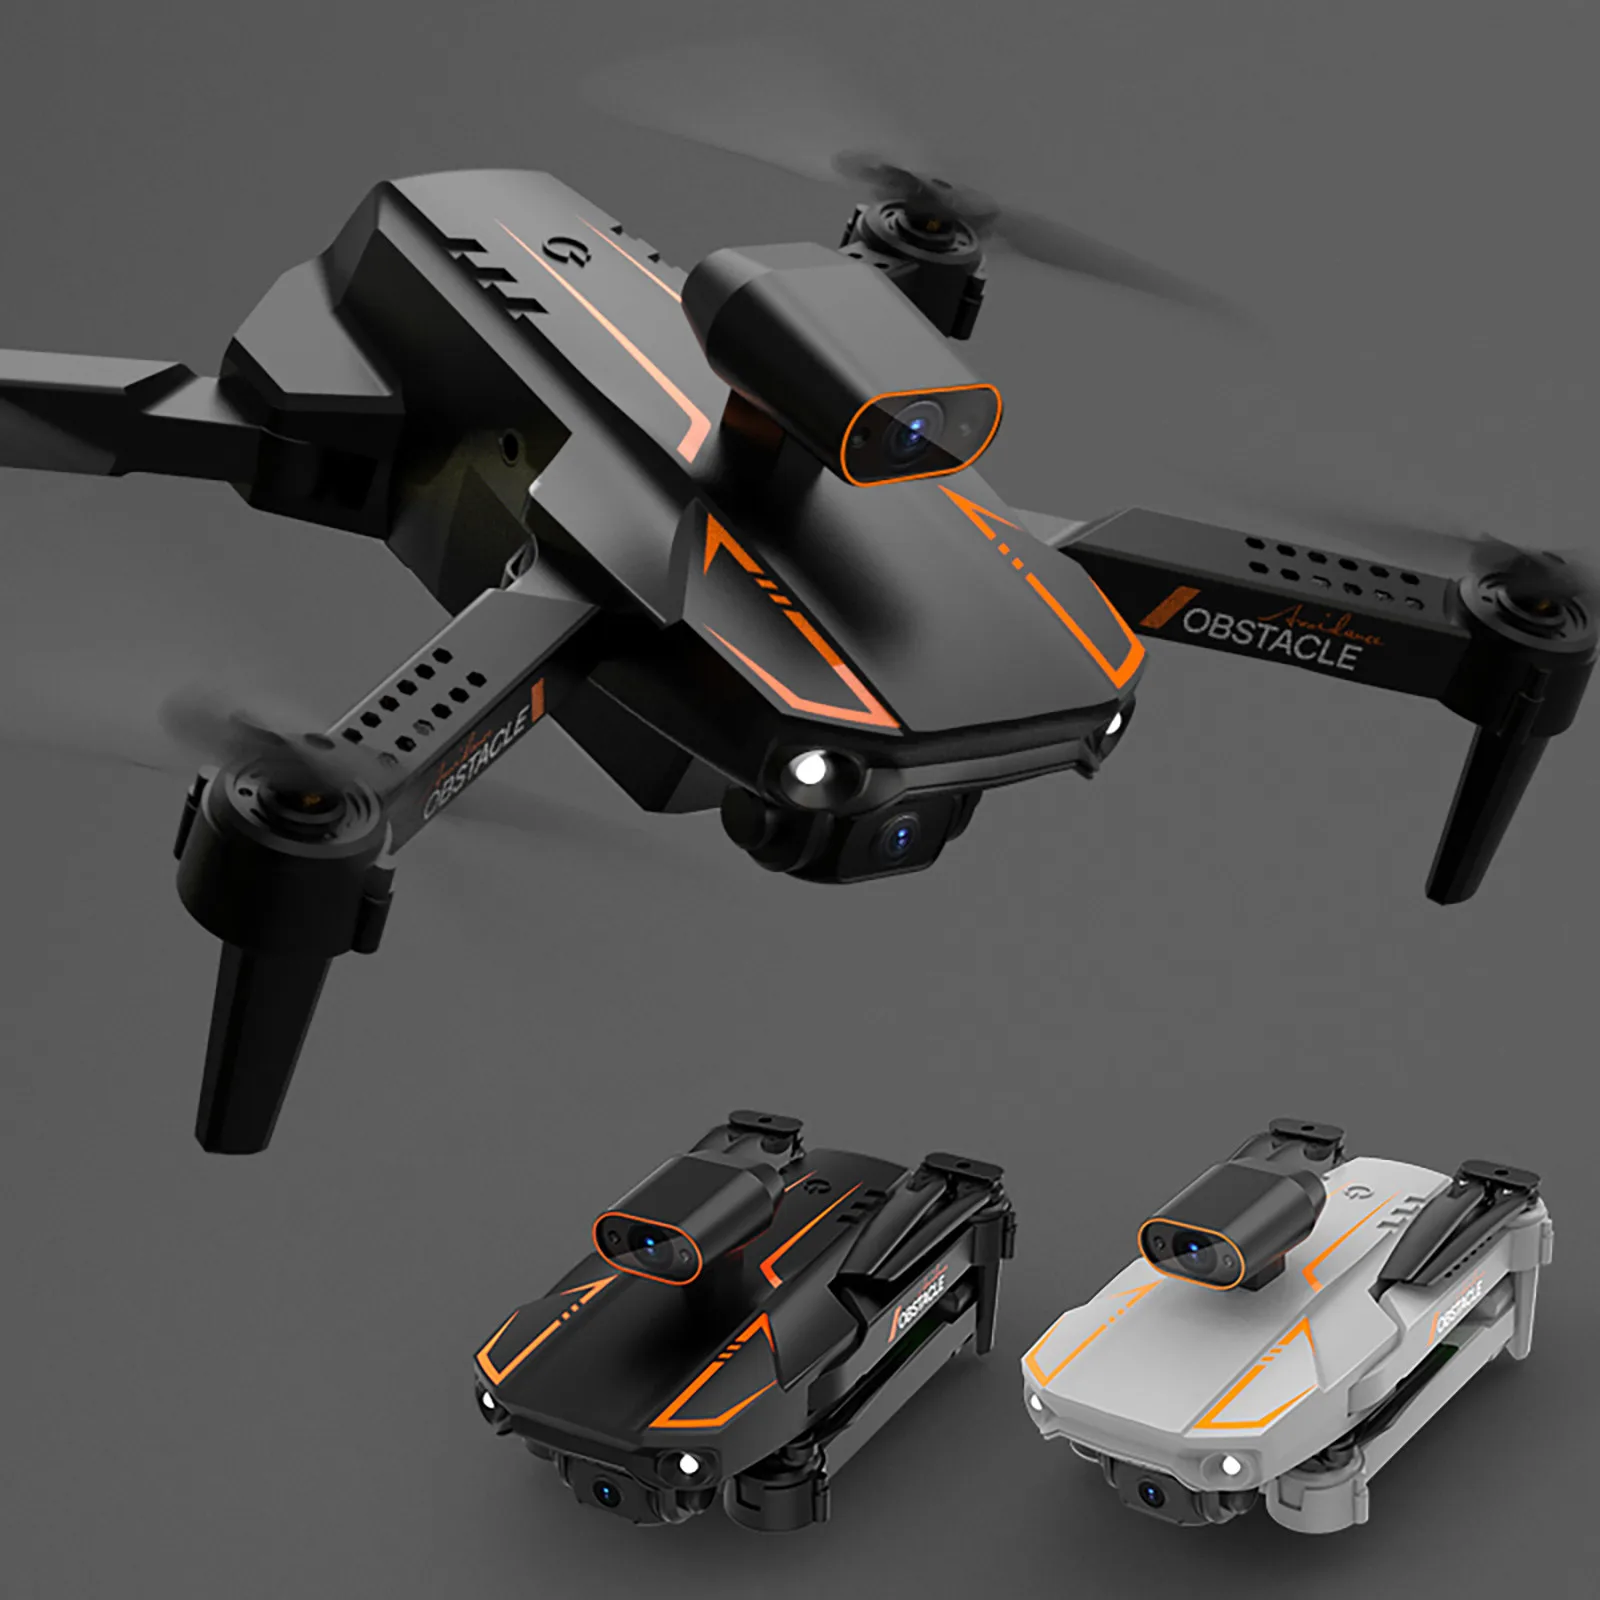 Utoghter S91 Folding Real-time Aerial Photography Four-axis Toy Gift Fixed - £45.18 GBP